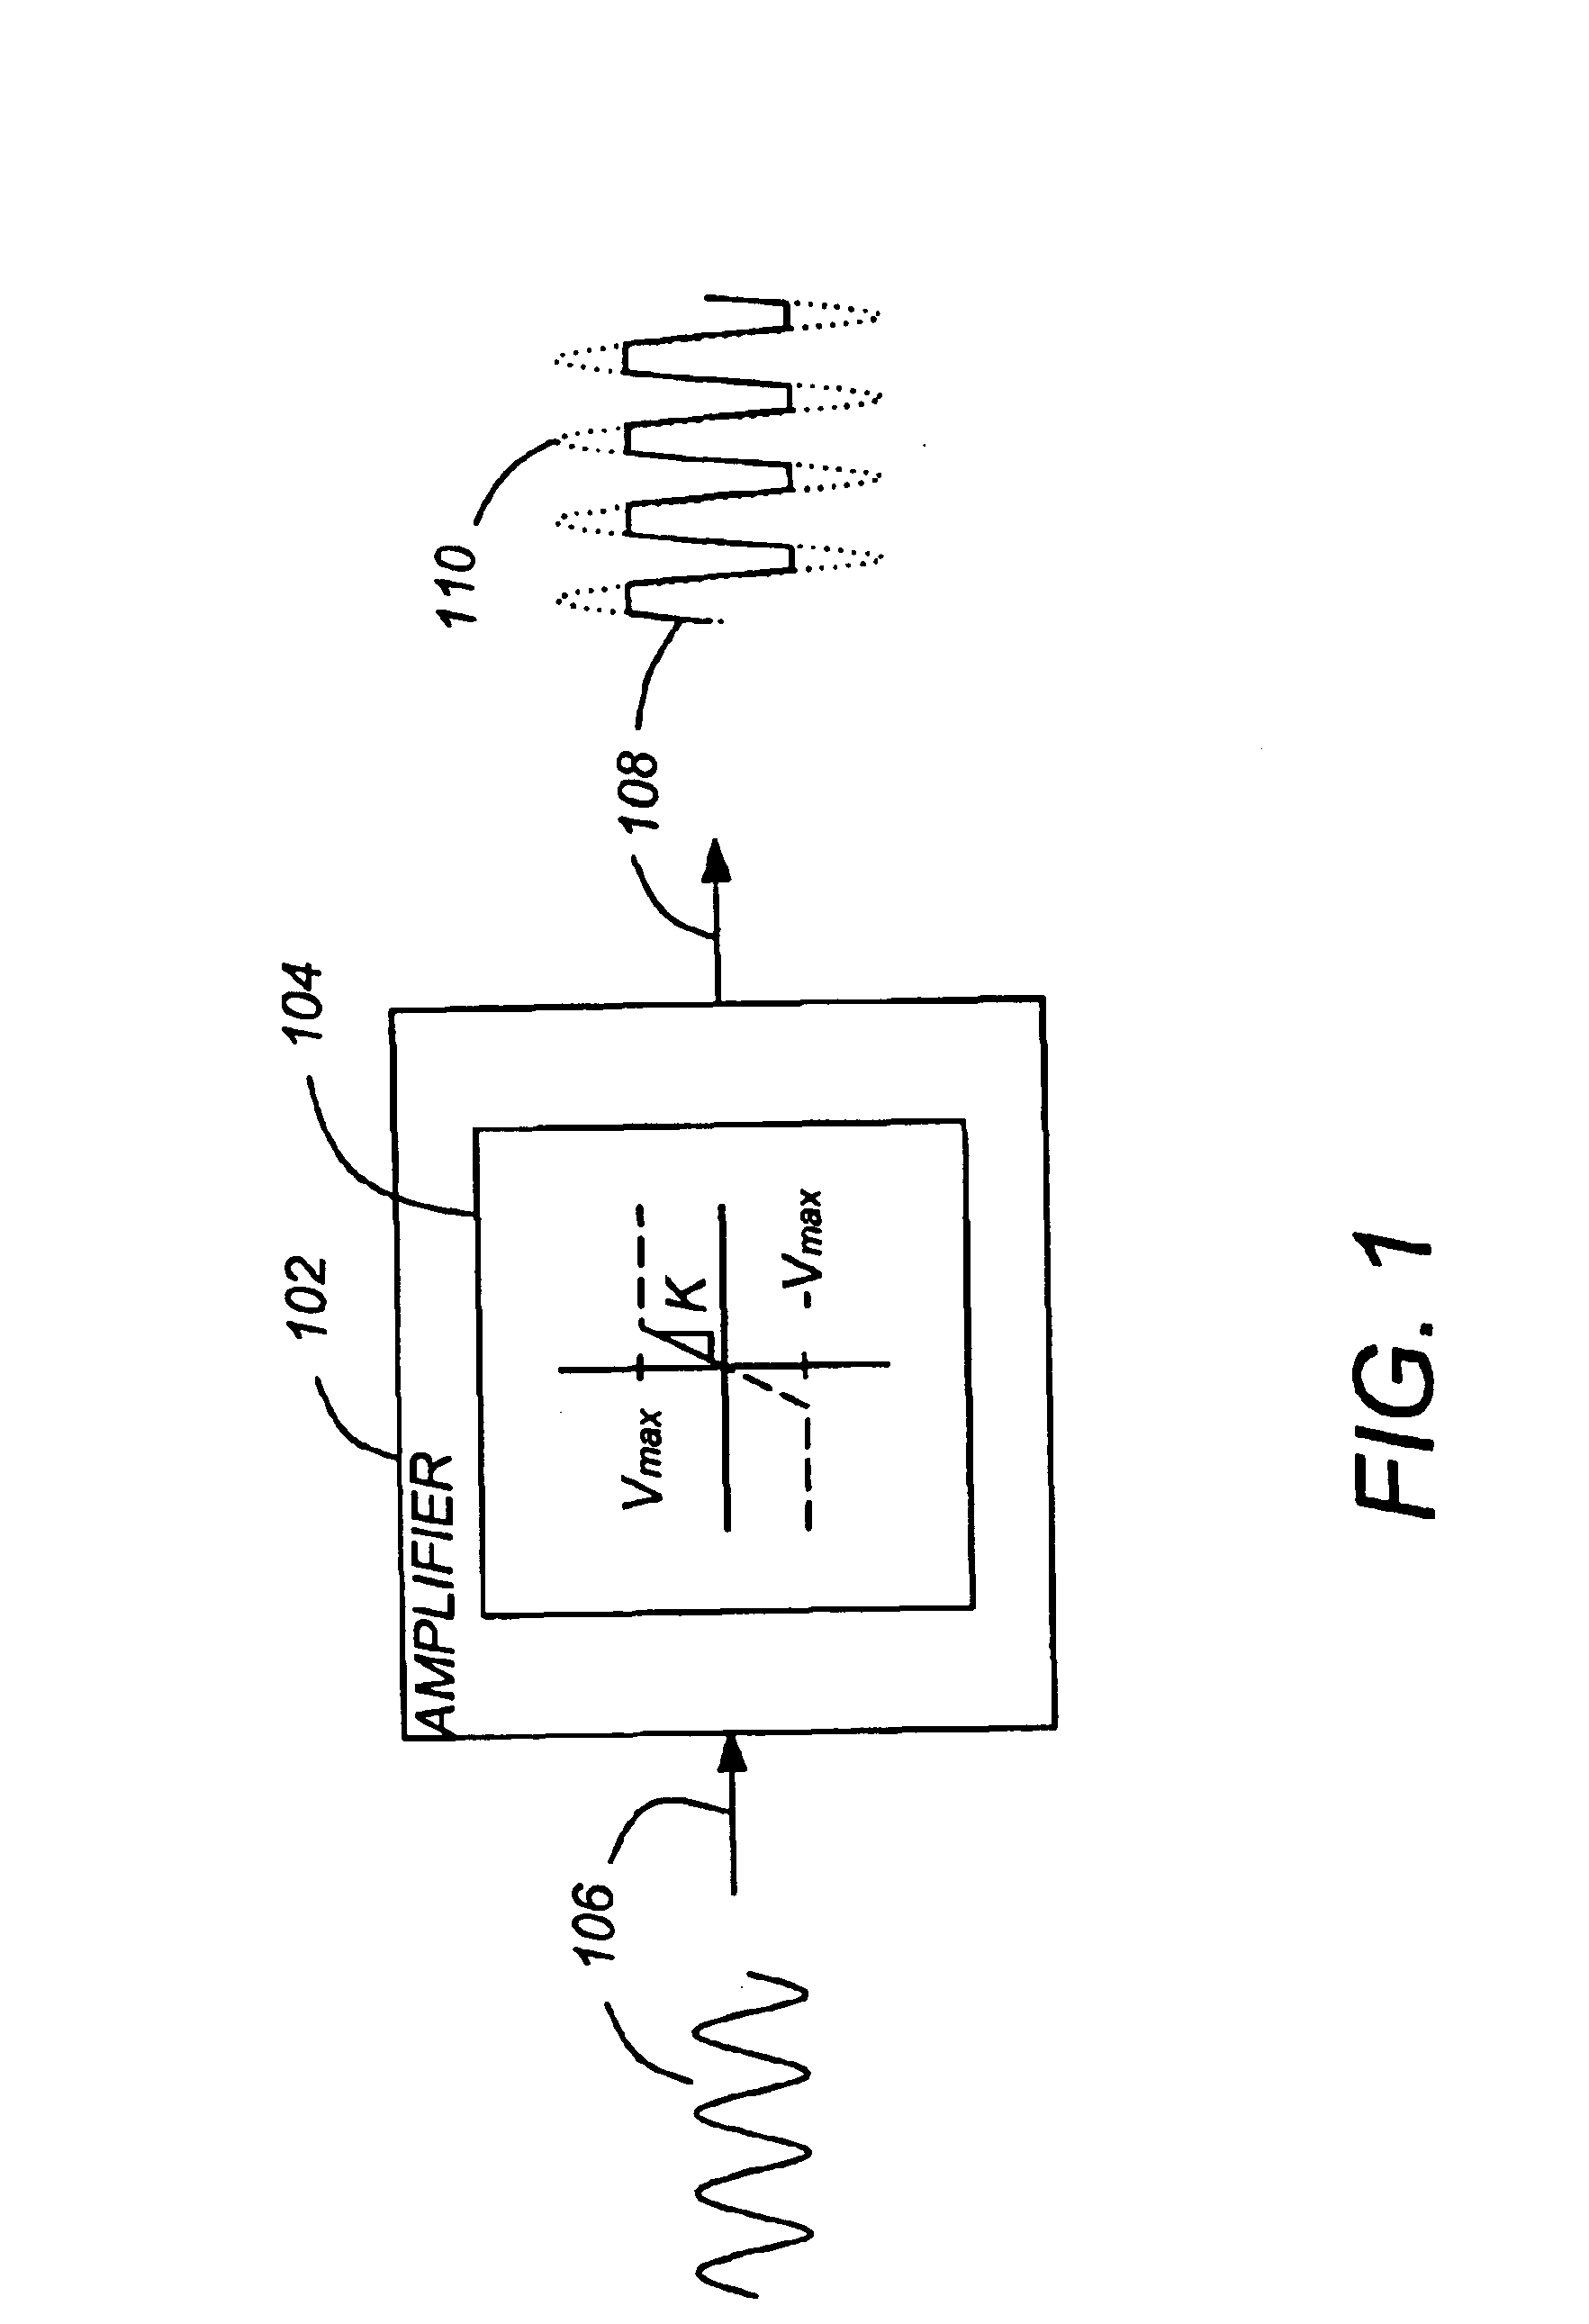 Method and apparatus for low intermodulation distortion amplification in selected bands